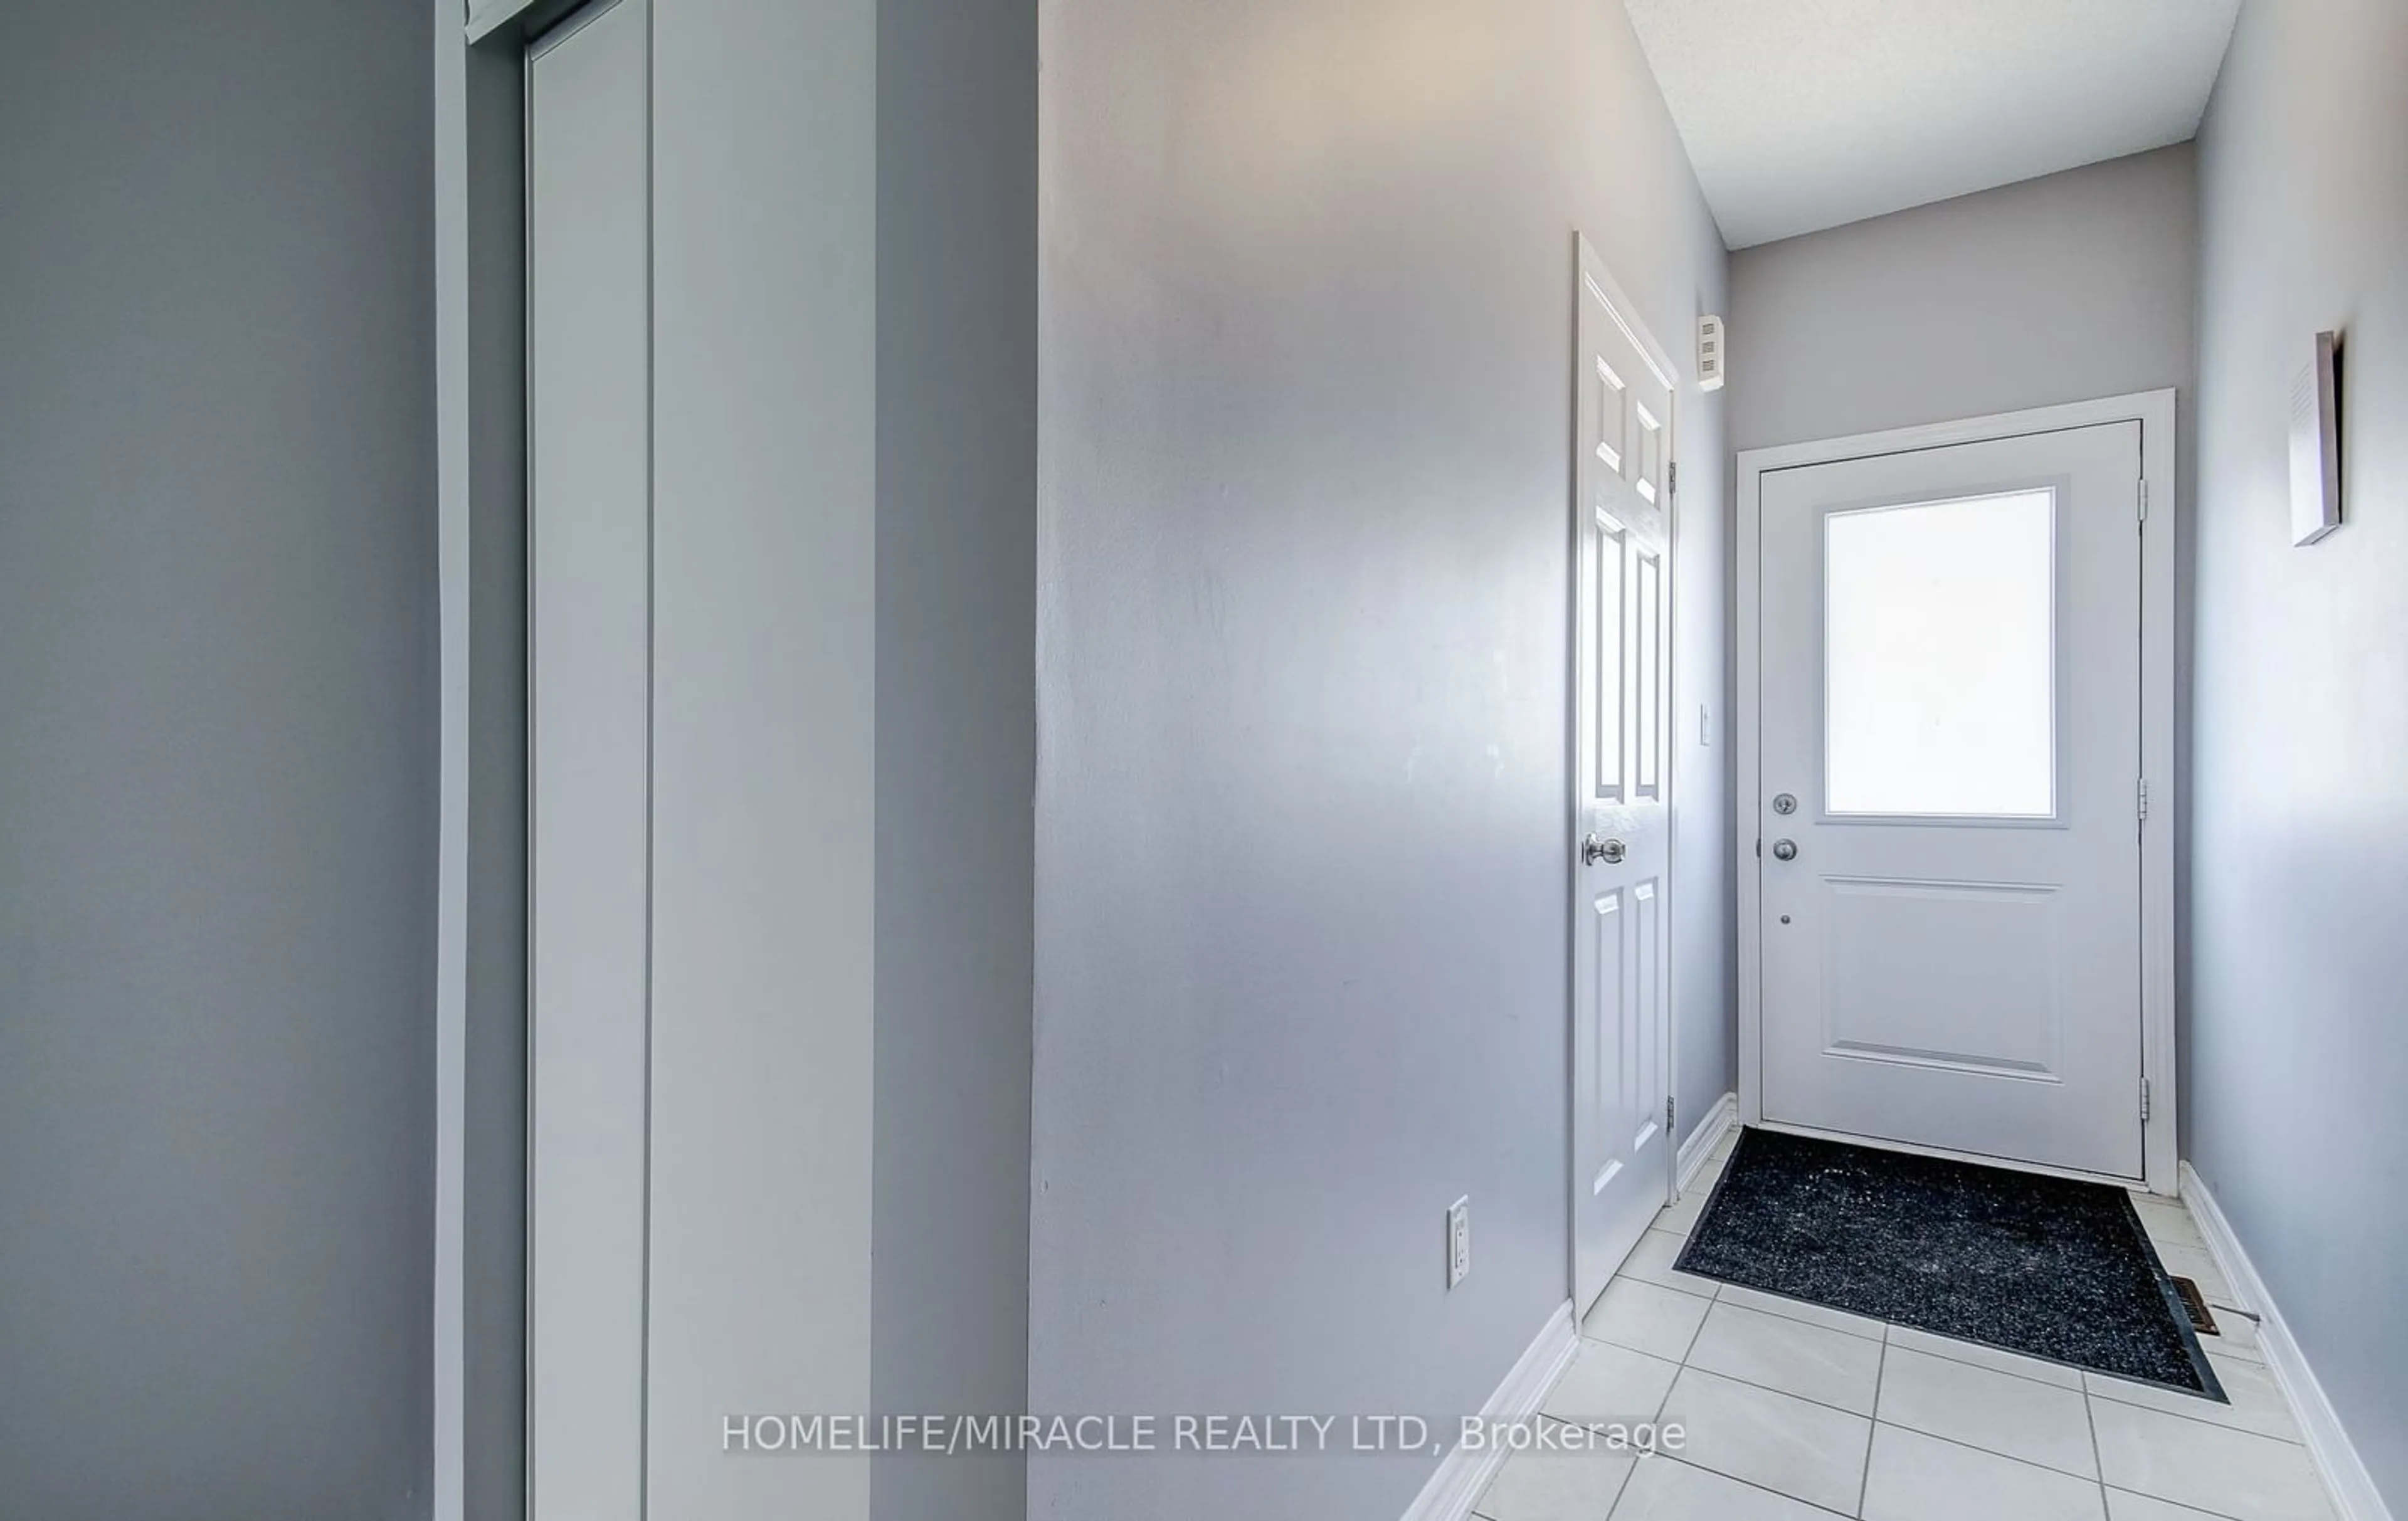 Indoor entryway for 21 Prospect Way, Whitby Ontario L1N 0L4